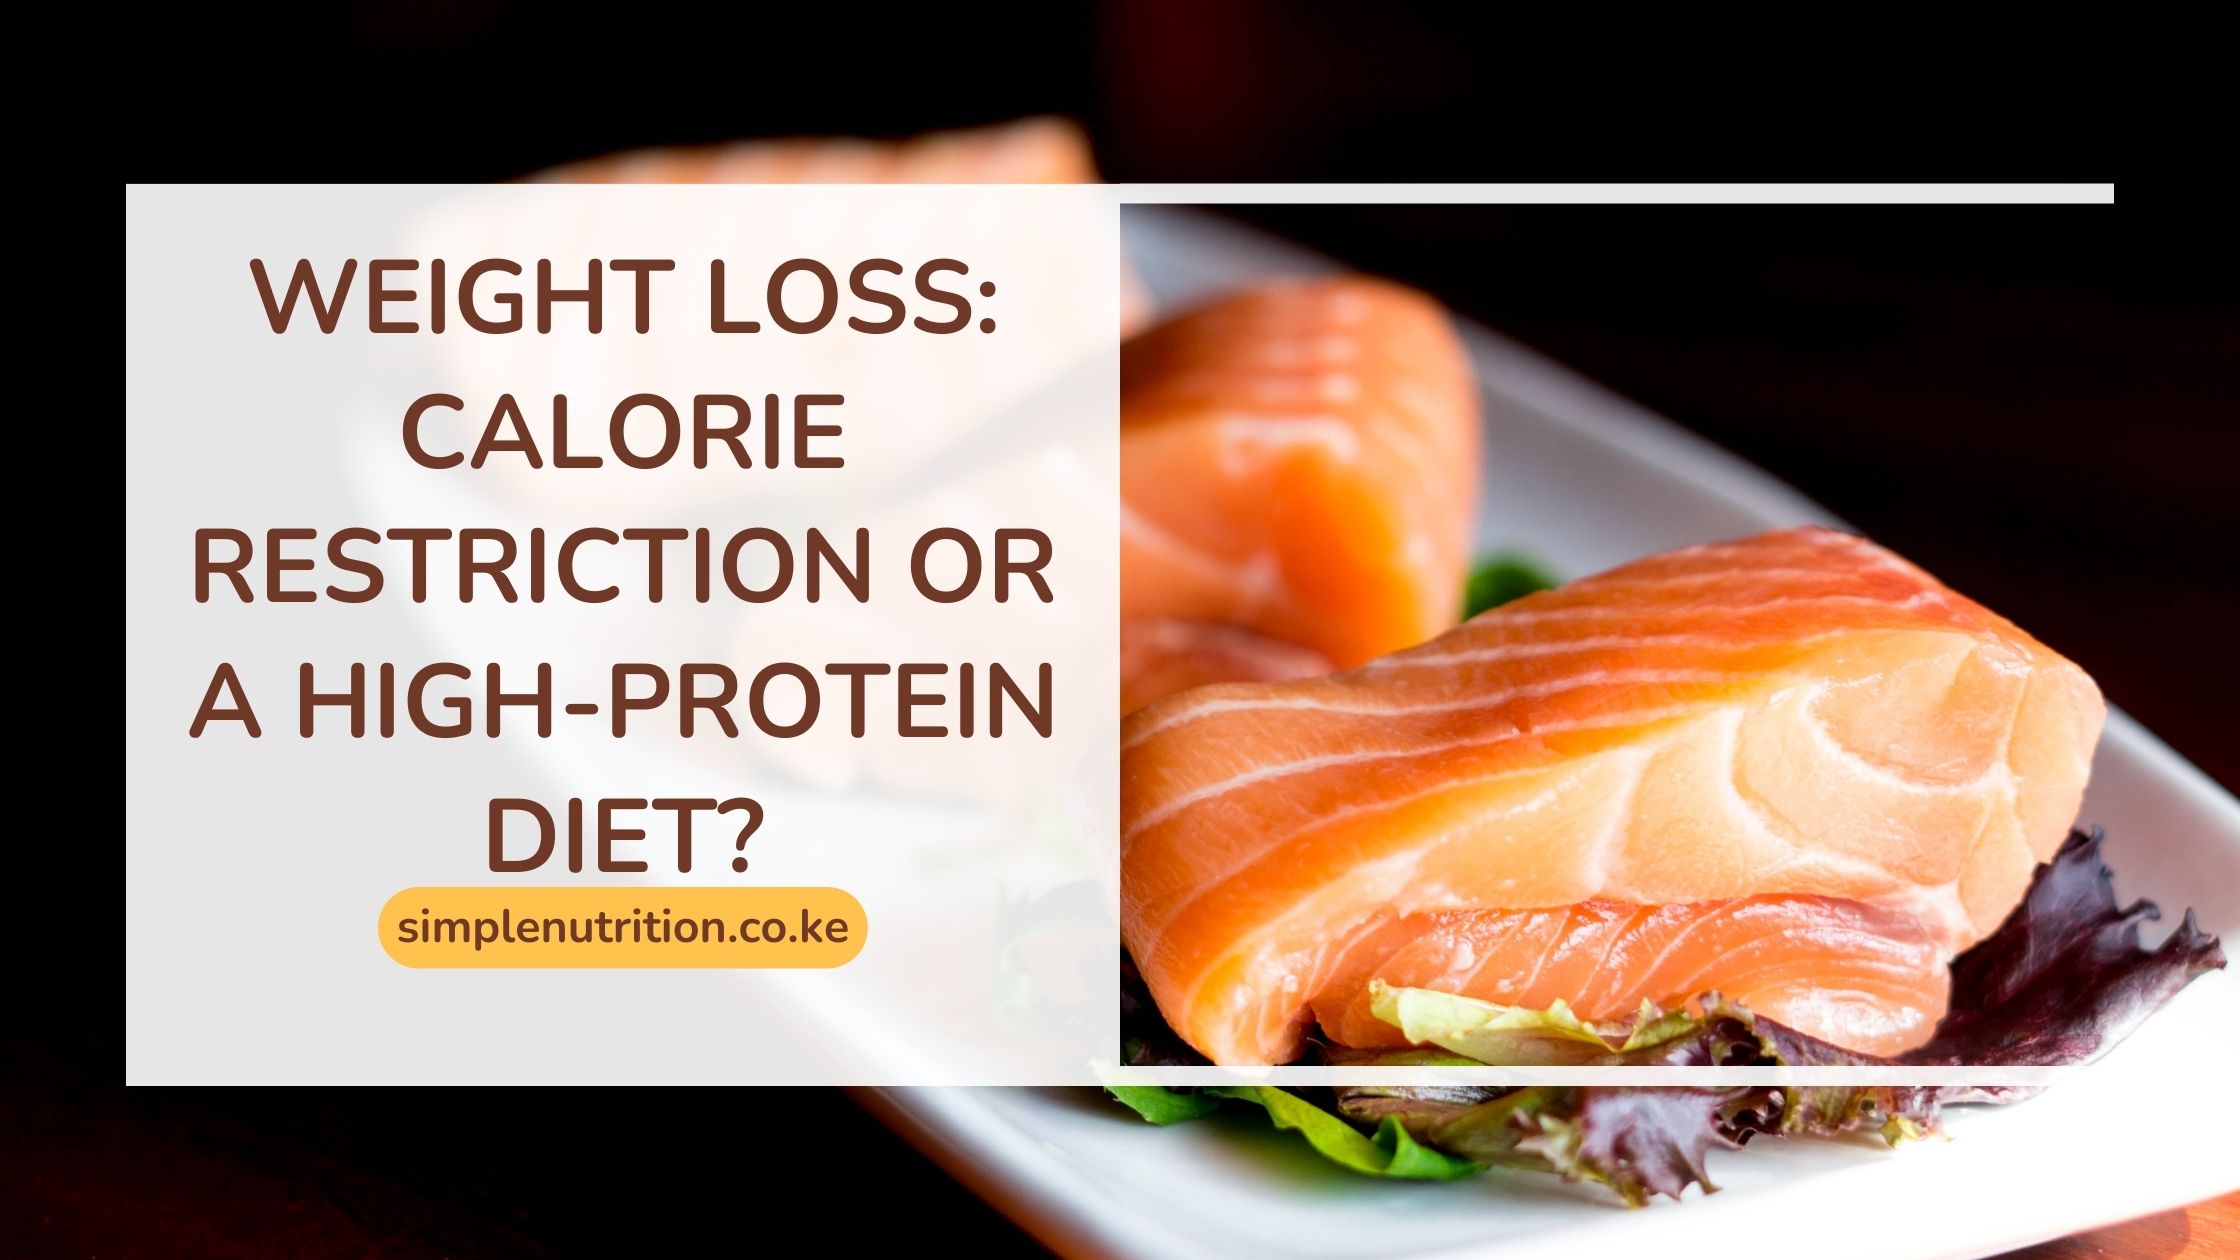 Is Calorie restriction good for weight loss?